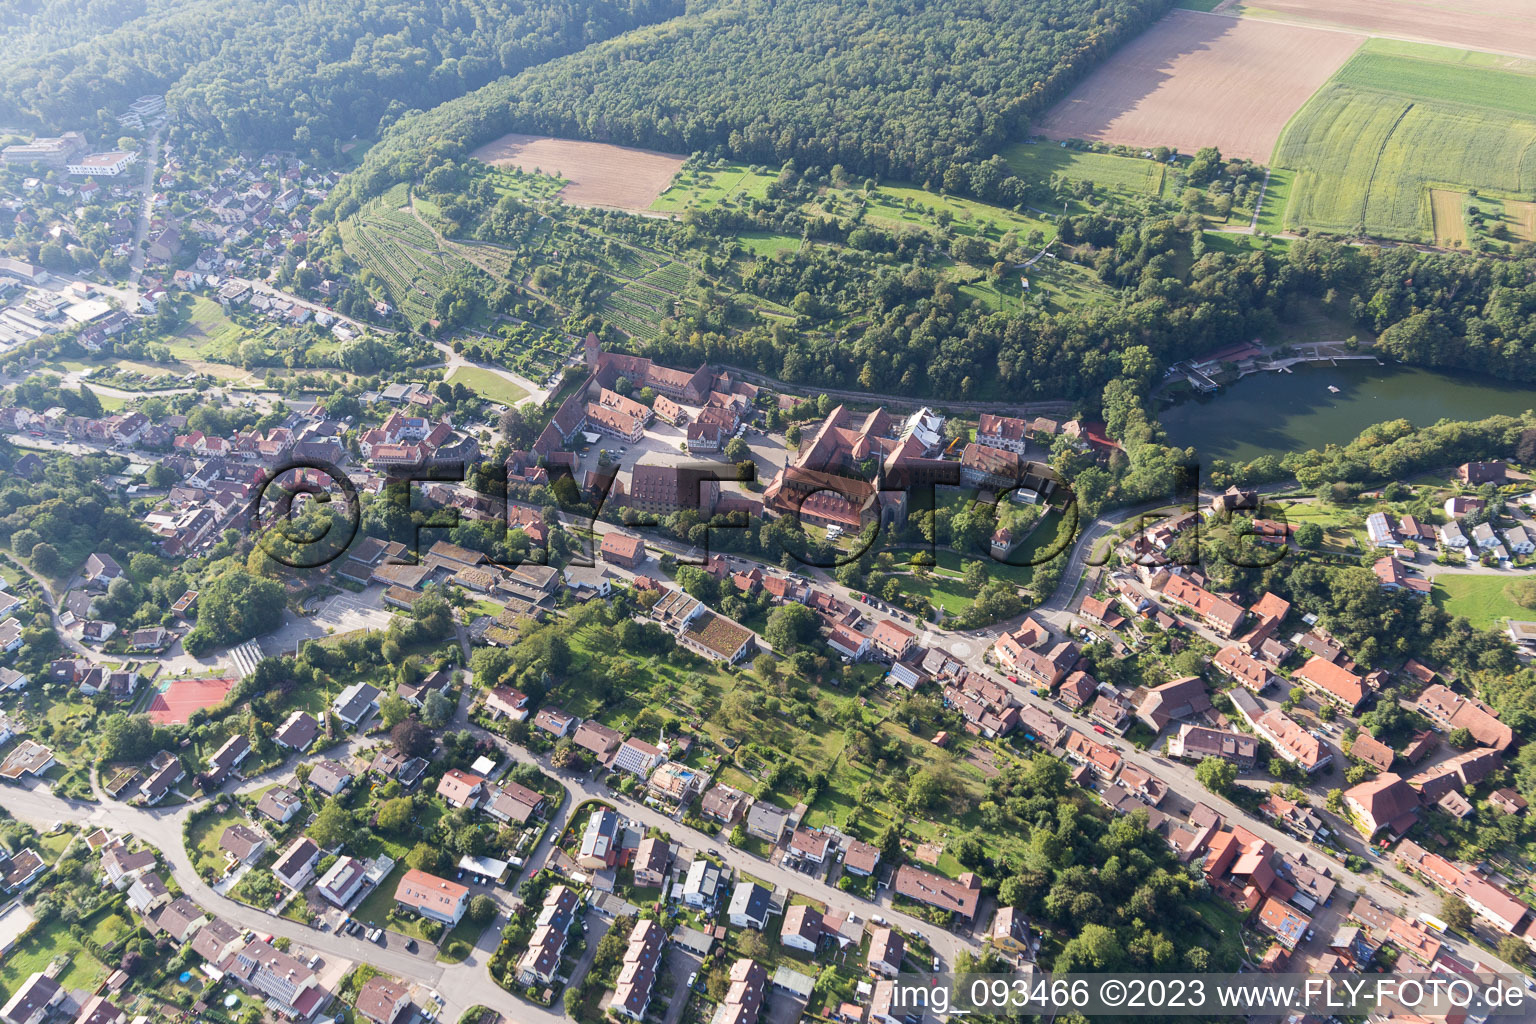 Maulbronn in the state Baden-Wuerttemberg, Germany from the plane